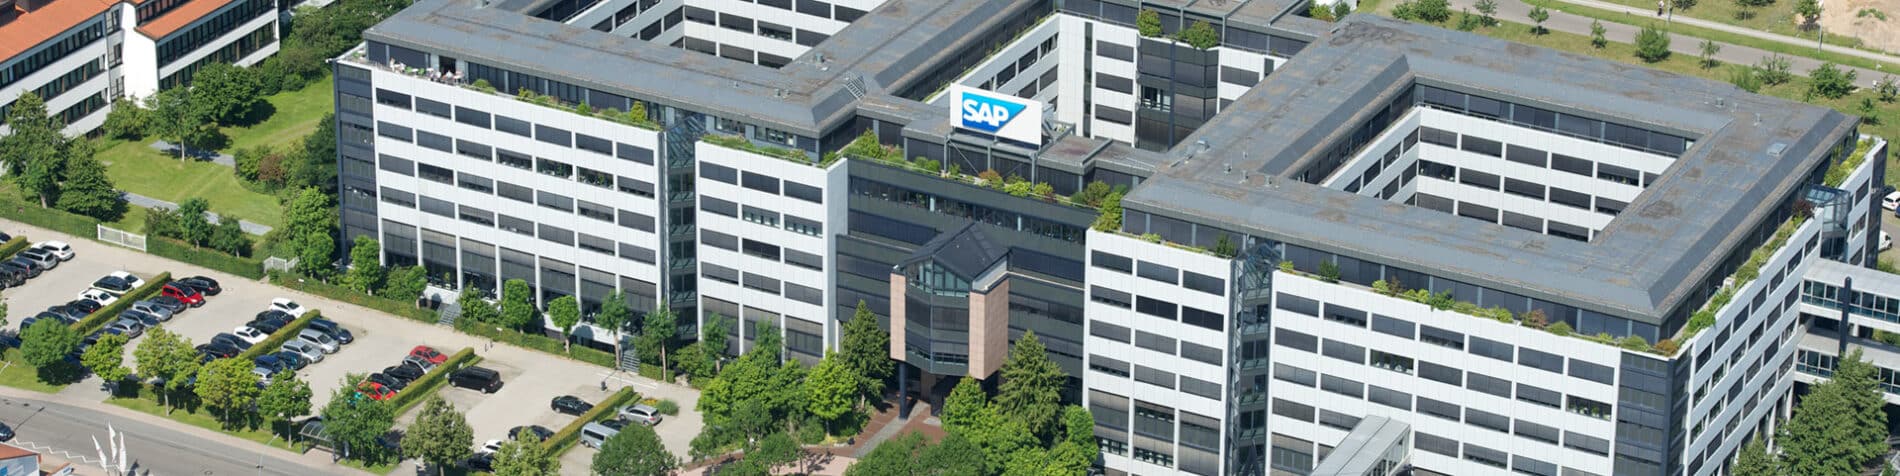 SAP Releases Integrated Report 2019 and Files Annual Report 2019 on Form 20-F with the U.S. Securities and Exchange Commission